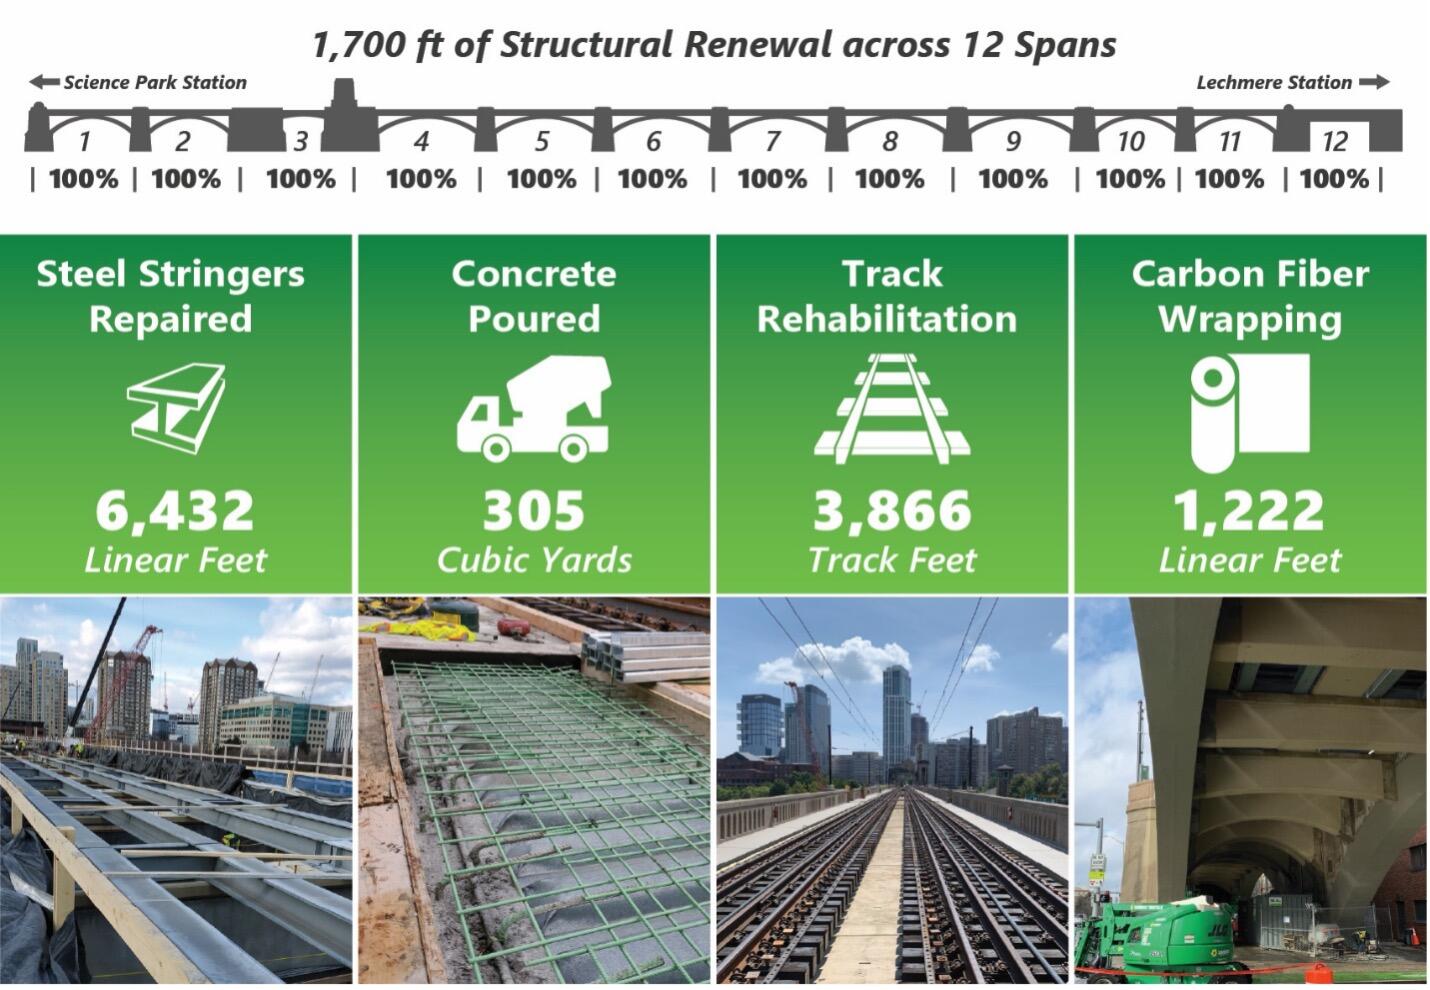 a graphic representation of the work done during the lechmere viaduct project, with photos of the work to accompany the graphic: 6,432 linear feet of steel springers repaired, 305 cubic yards of concrete poured, 3,866 track feet of track rehabilitation, and 1,222 linear feet of carbon fiber wrapping